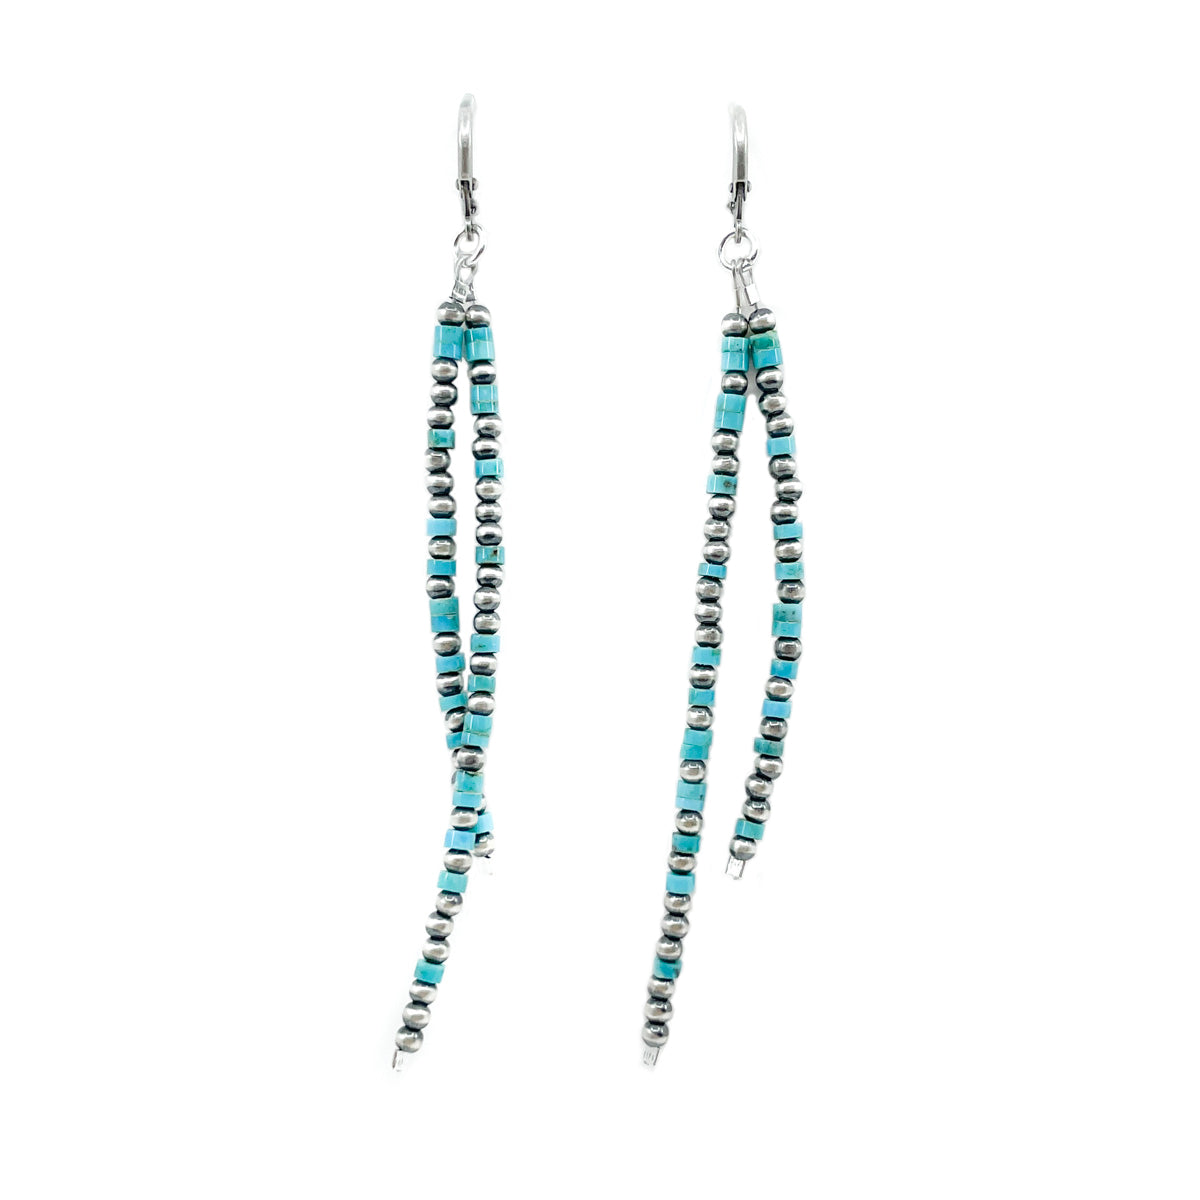 Load image into Gallery viewer, Earrings: Sterling silver lever back ear wires by Esther Reano Turquoise Heishe beads with sterling silver beads Measures approx. 3.25 inches long, dangles 3.5 inches from earlobe
